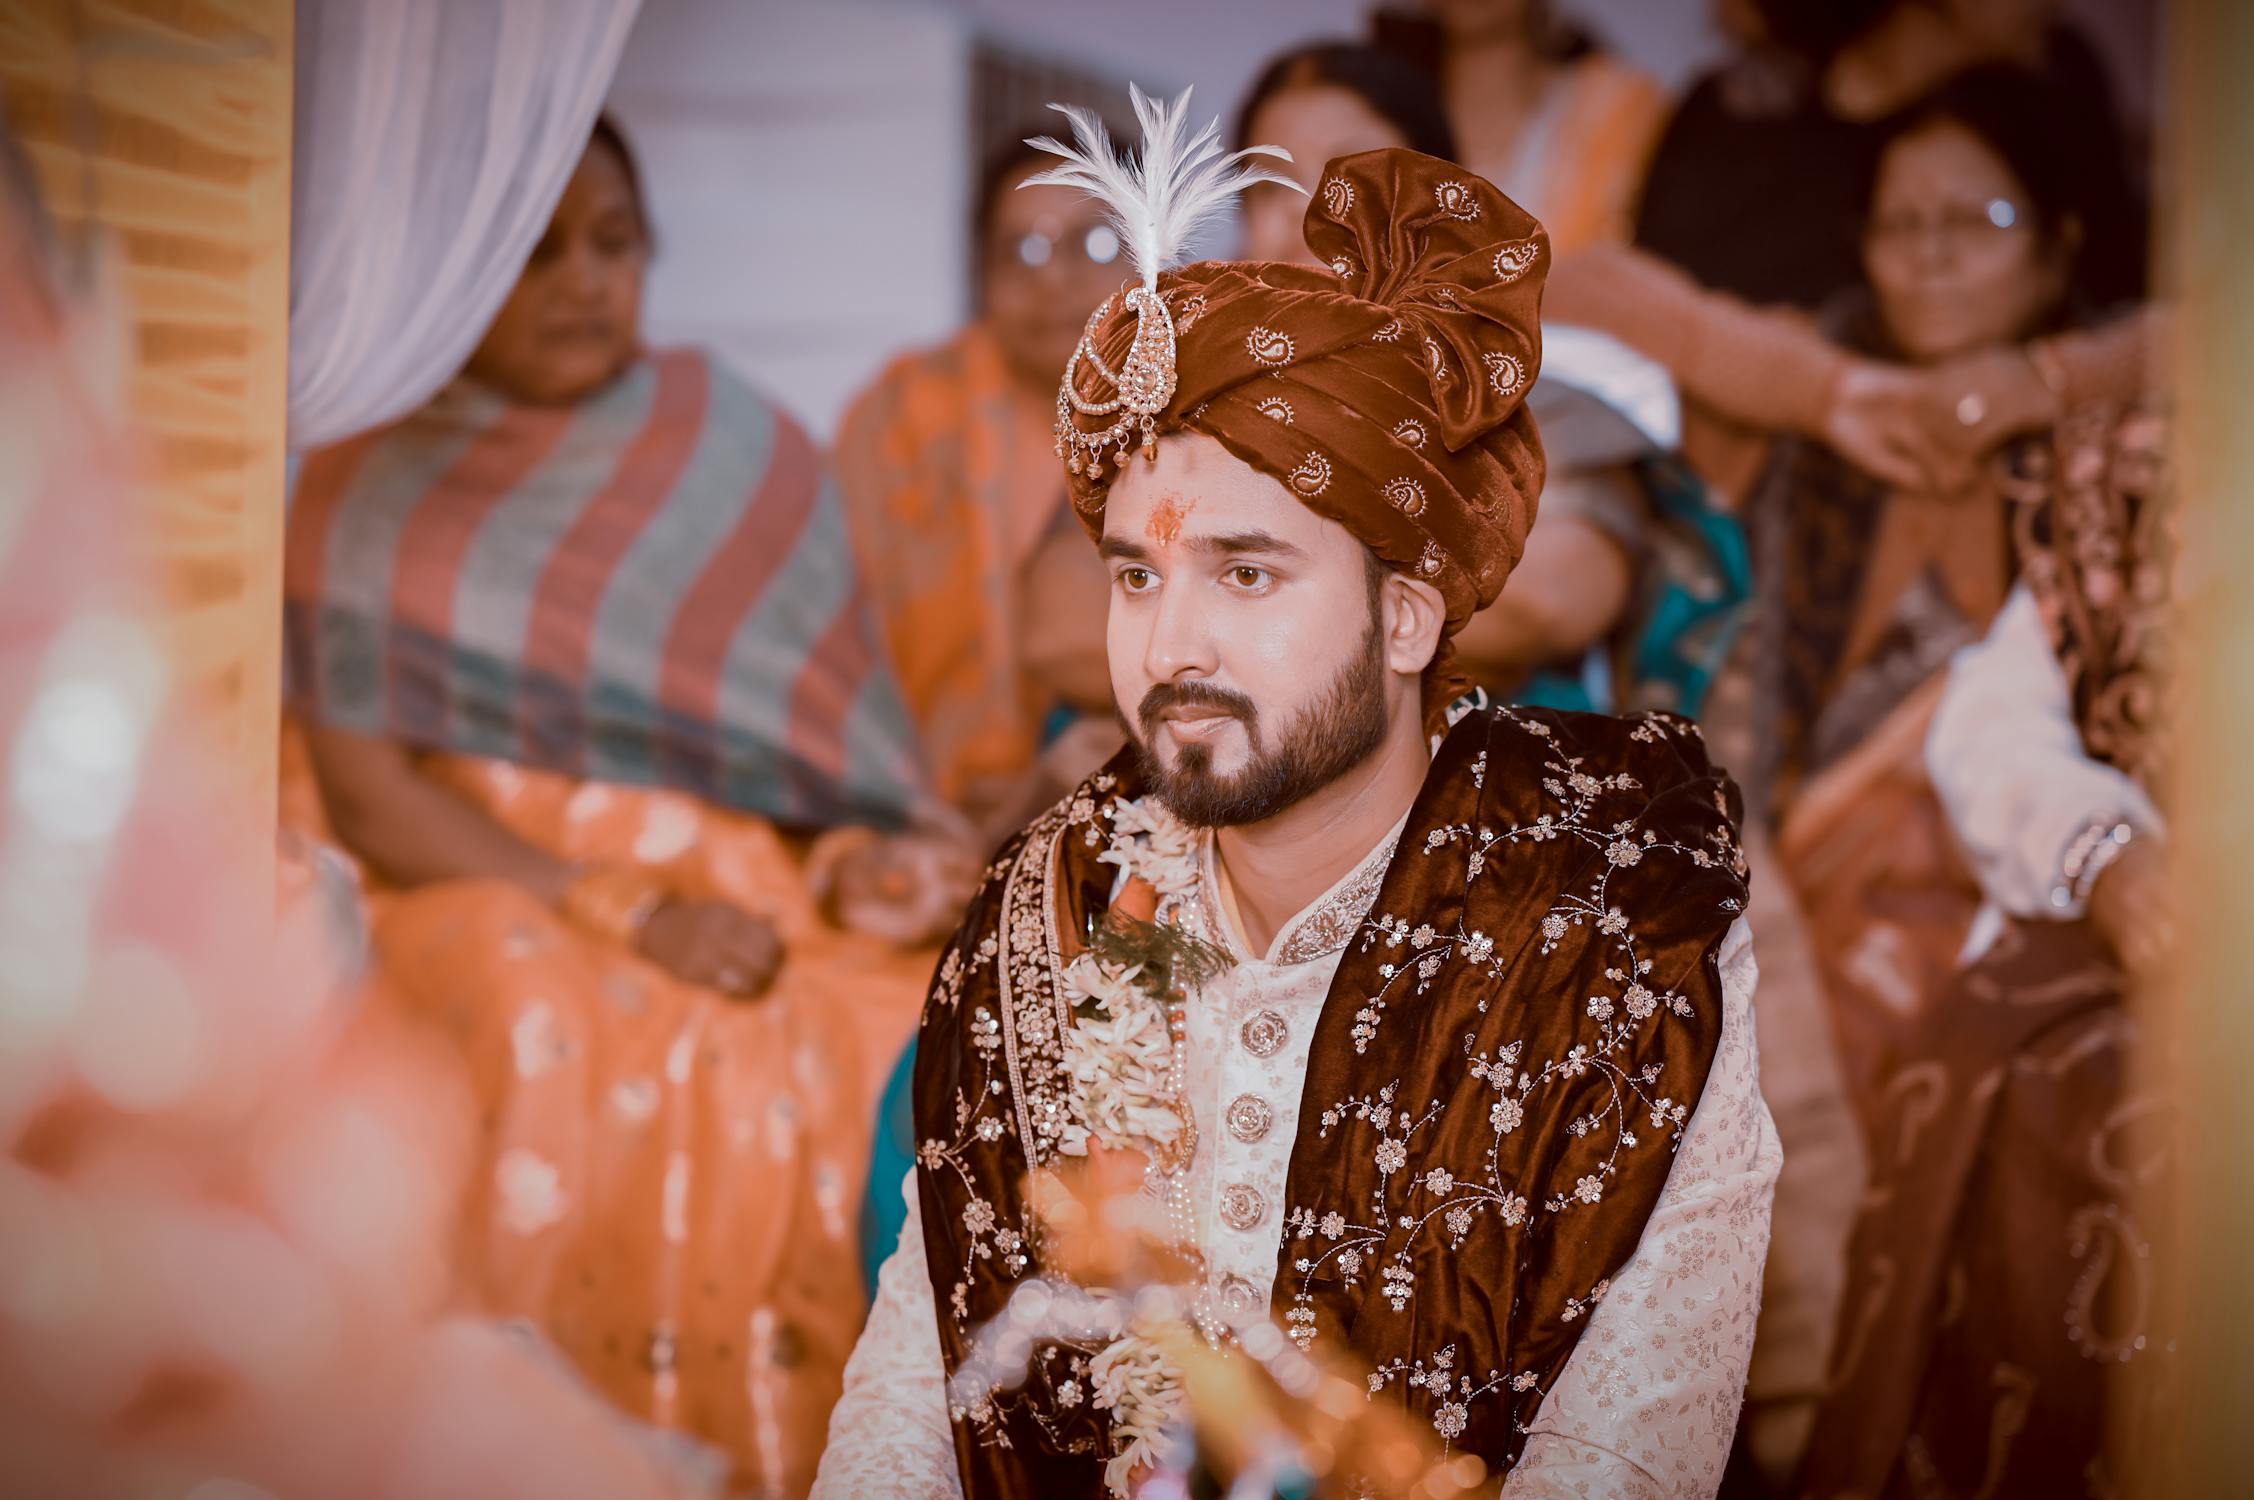 Indian Groom Photo by UniQue  Click from Pexels: https://www.pexels.com/photo/groom-wearing-traditional-clothes-6498098/